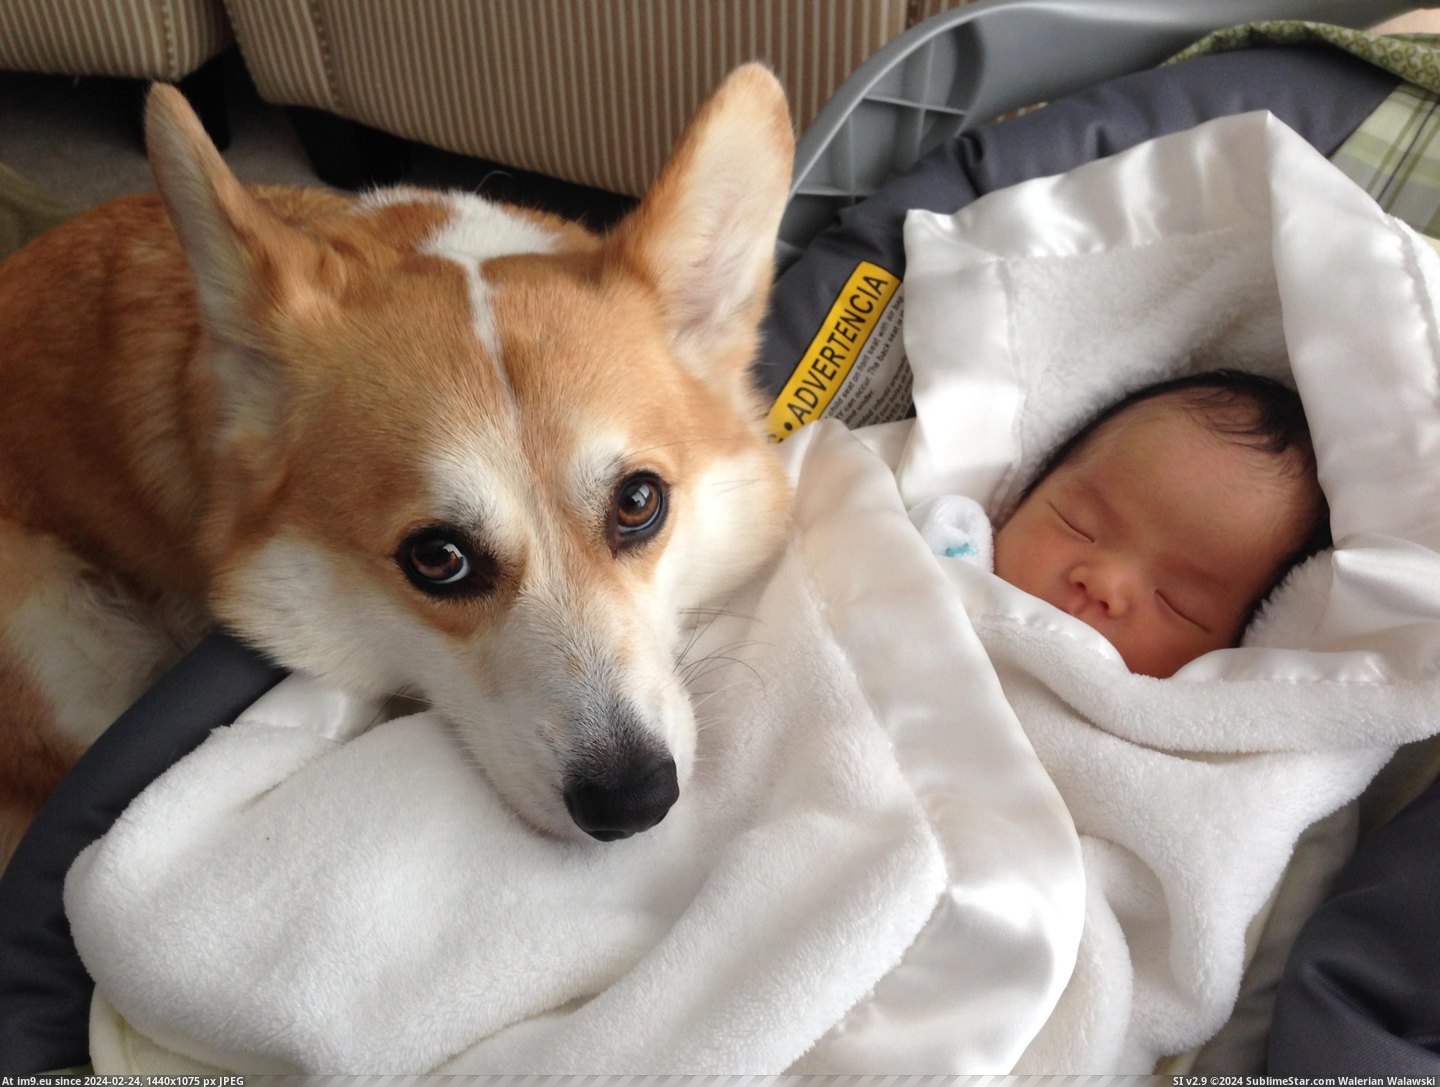 #Was #New #Ago #But #How #Daughter #Weeks #Born [Aww] My daughter was born three weeks ago. I worried about how my corgi would react but he's treating her like his new BFF... 1 Pic. (Bild von album My r/AWW favs))